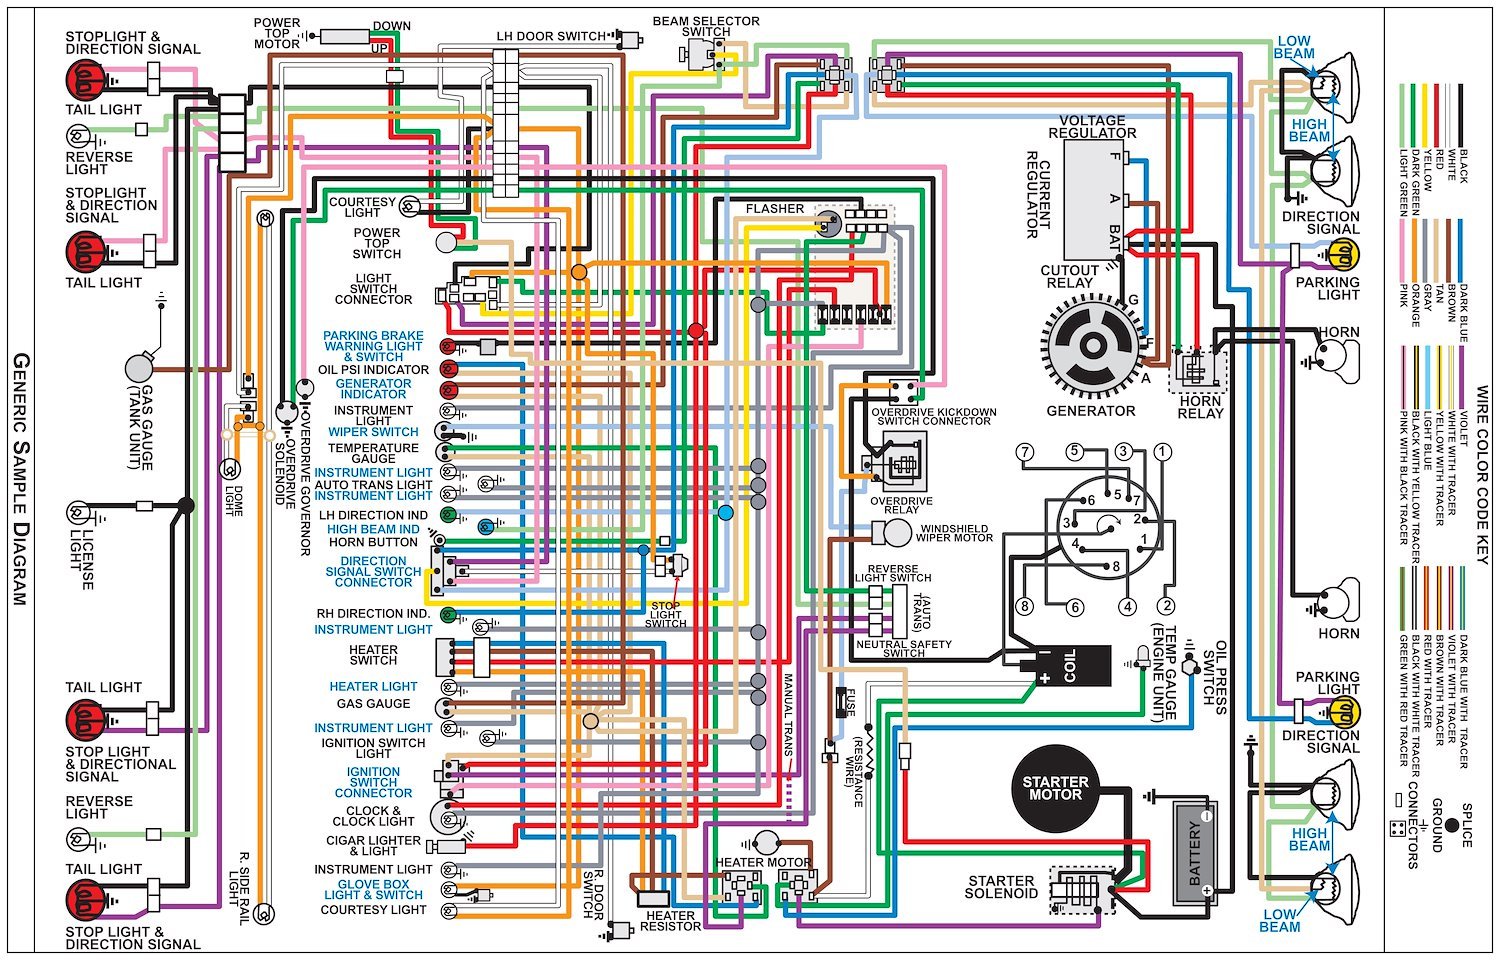 Wiring Diagram for 1973 Dodge Coronet, Charger with